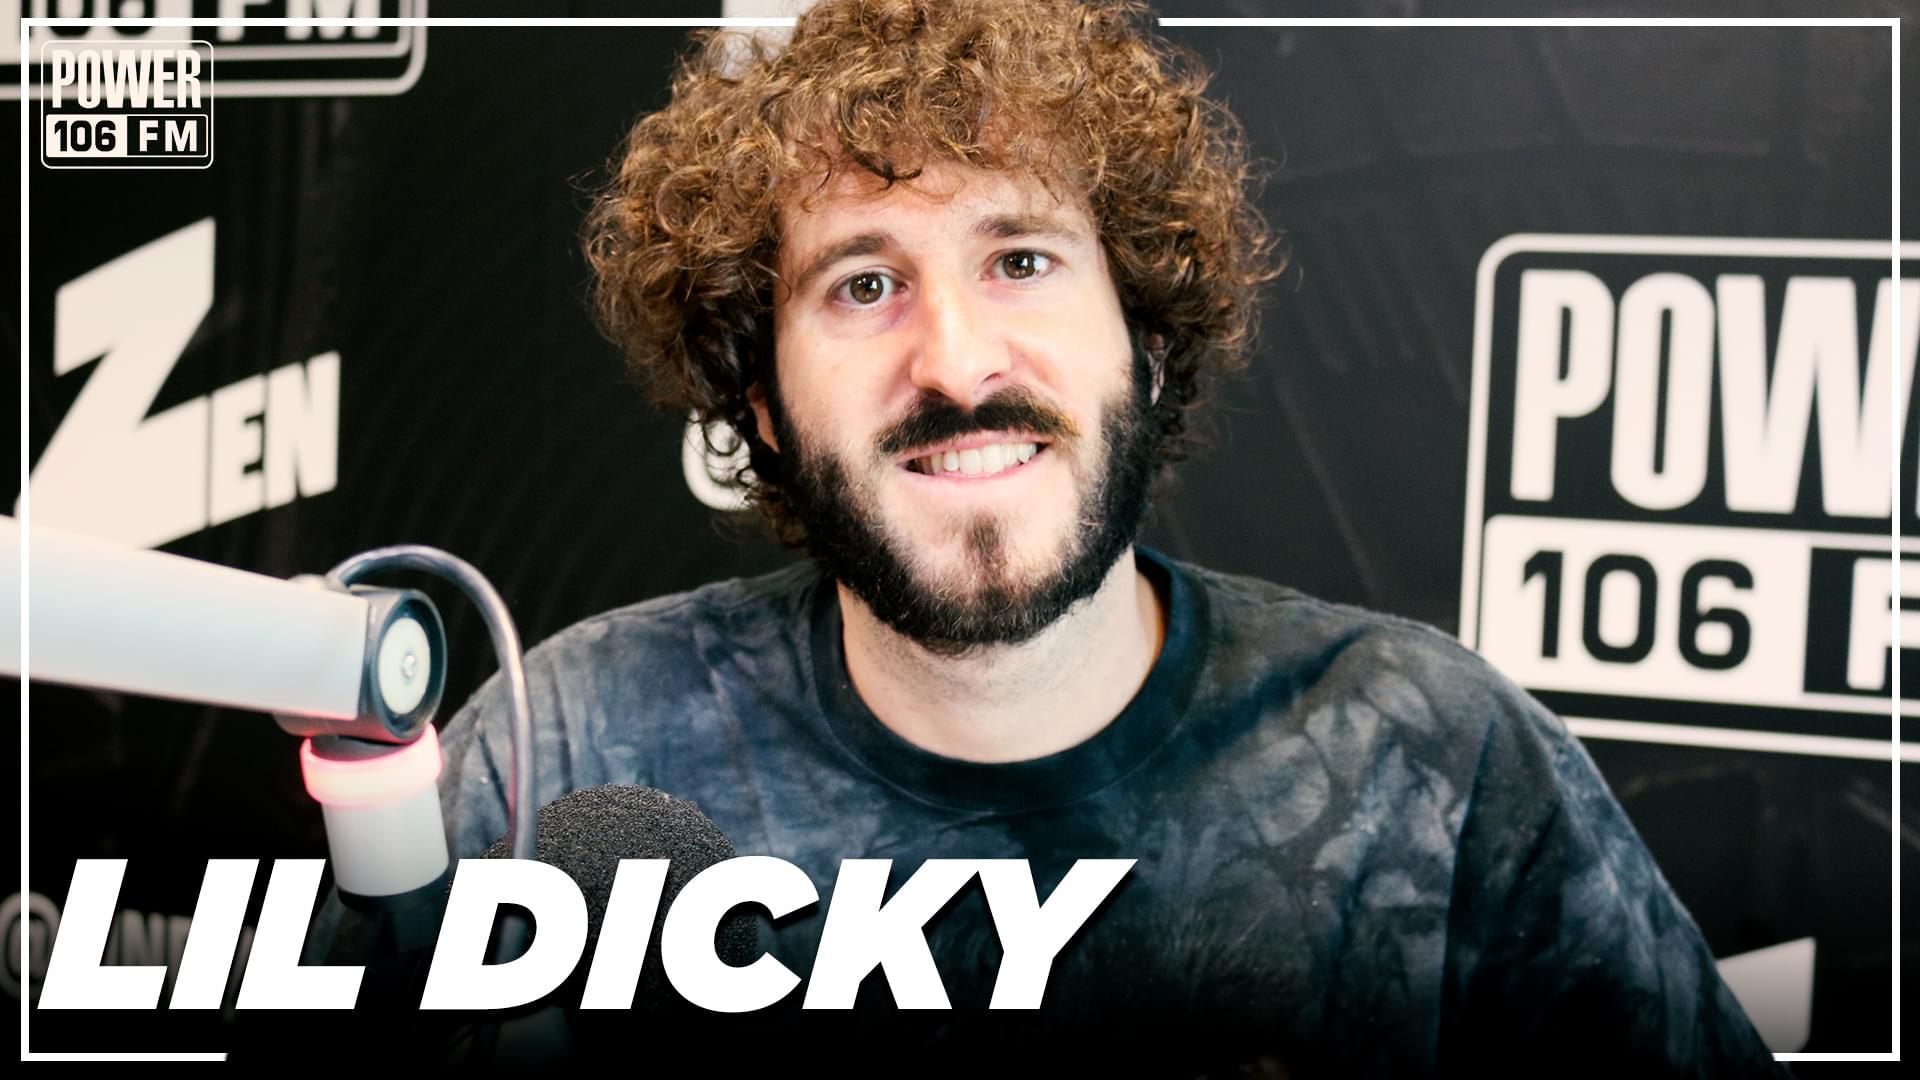 Lil Dicky. Lil Dicky Earth. Lil Dicky without Beard. Lil Dicky without. Lil dick